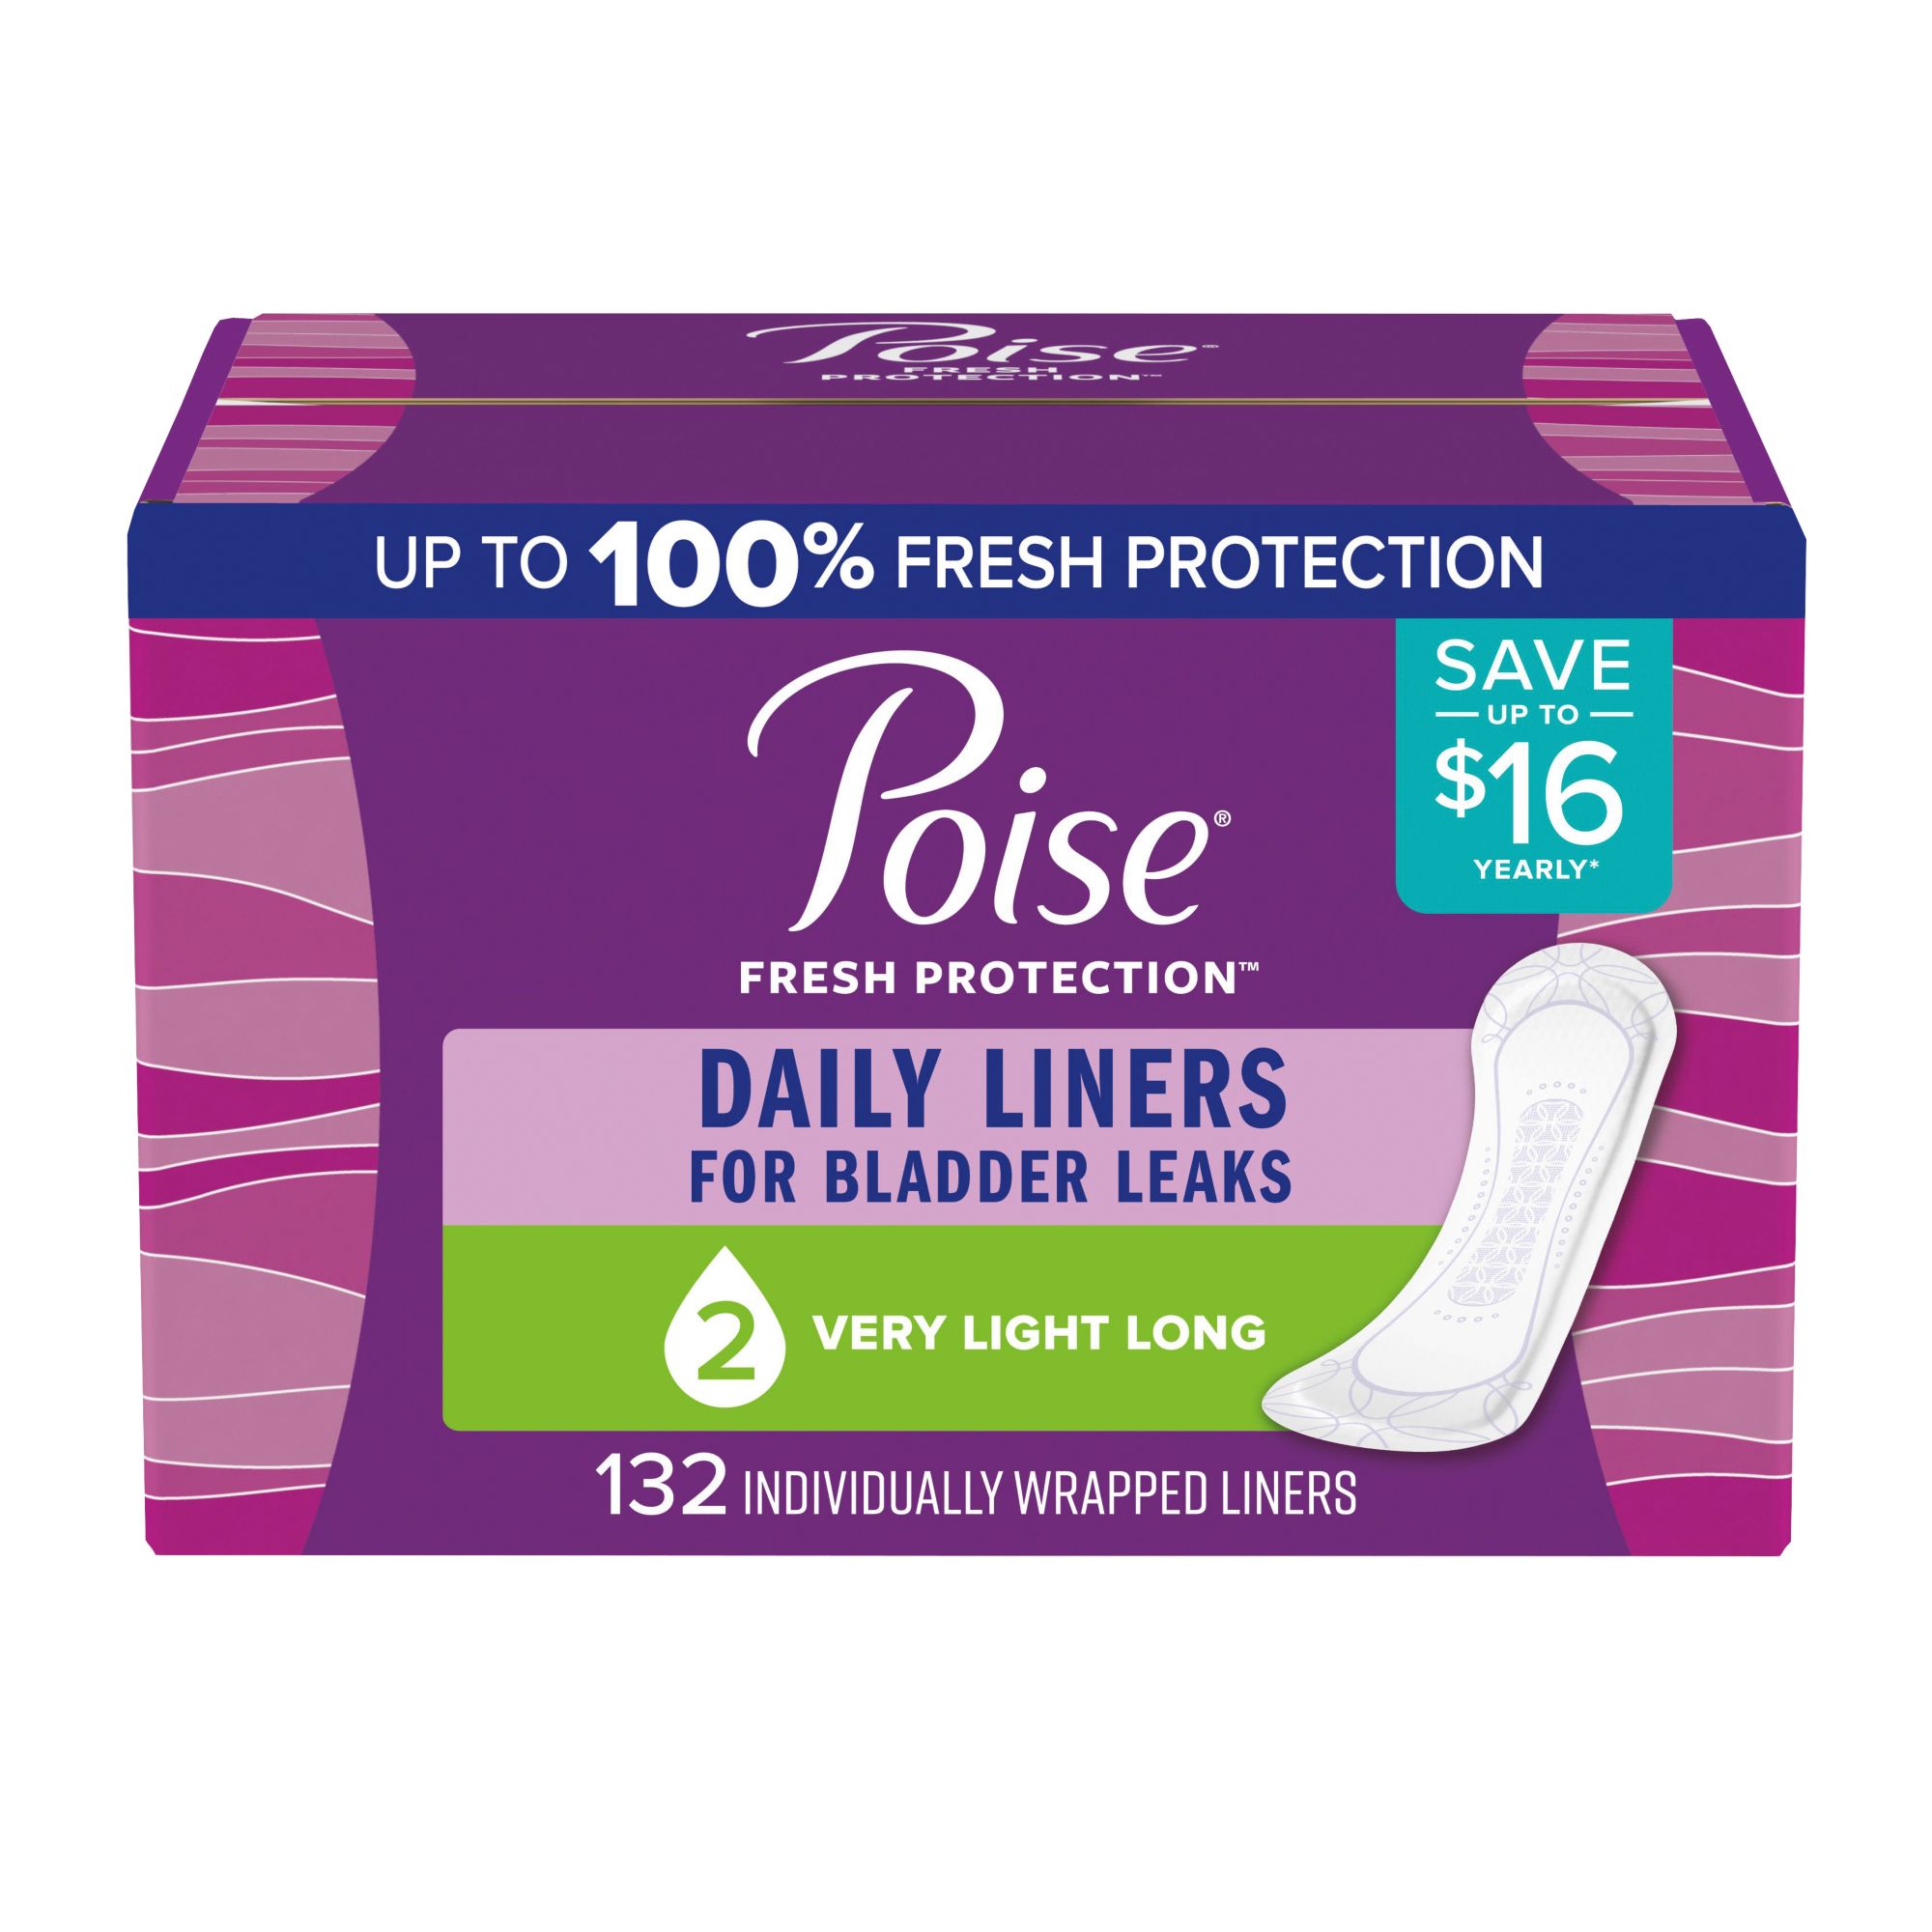 Dry Post Postpartum Pads & Maternity Incontinence - 2 Packs 20